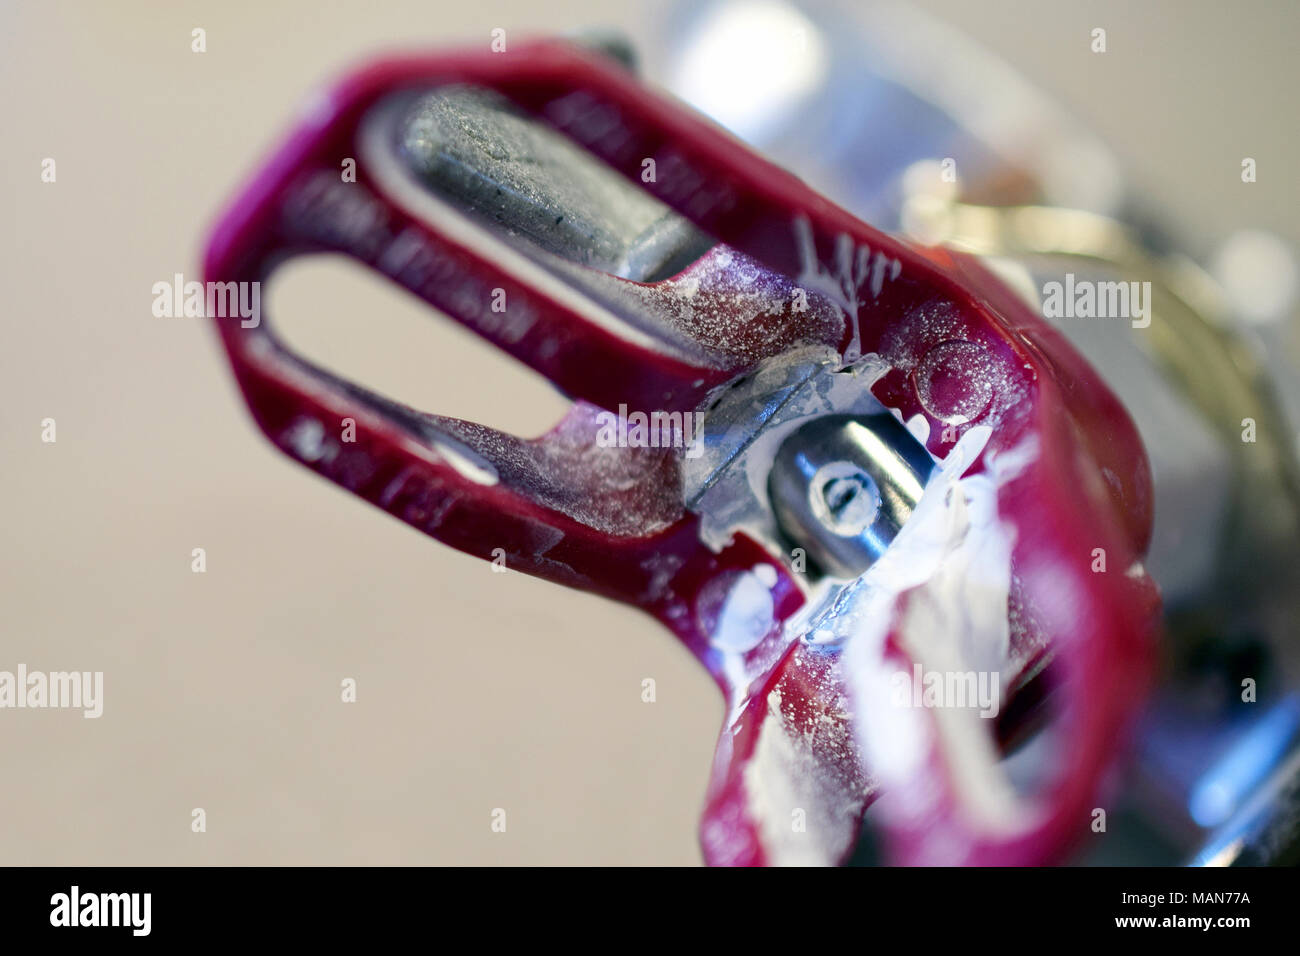 Close up of used airless spray gun. Horizontal industrial background image with space for text. Stock Photo